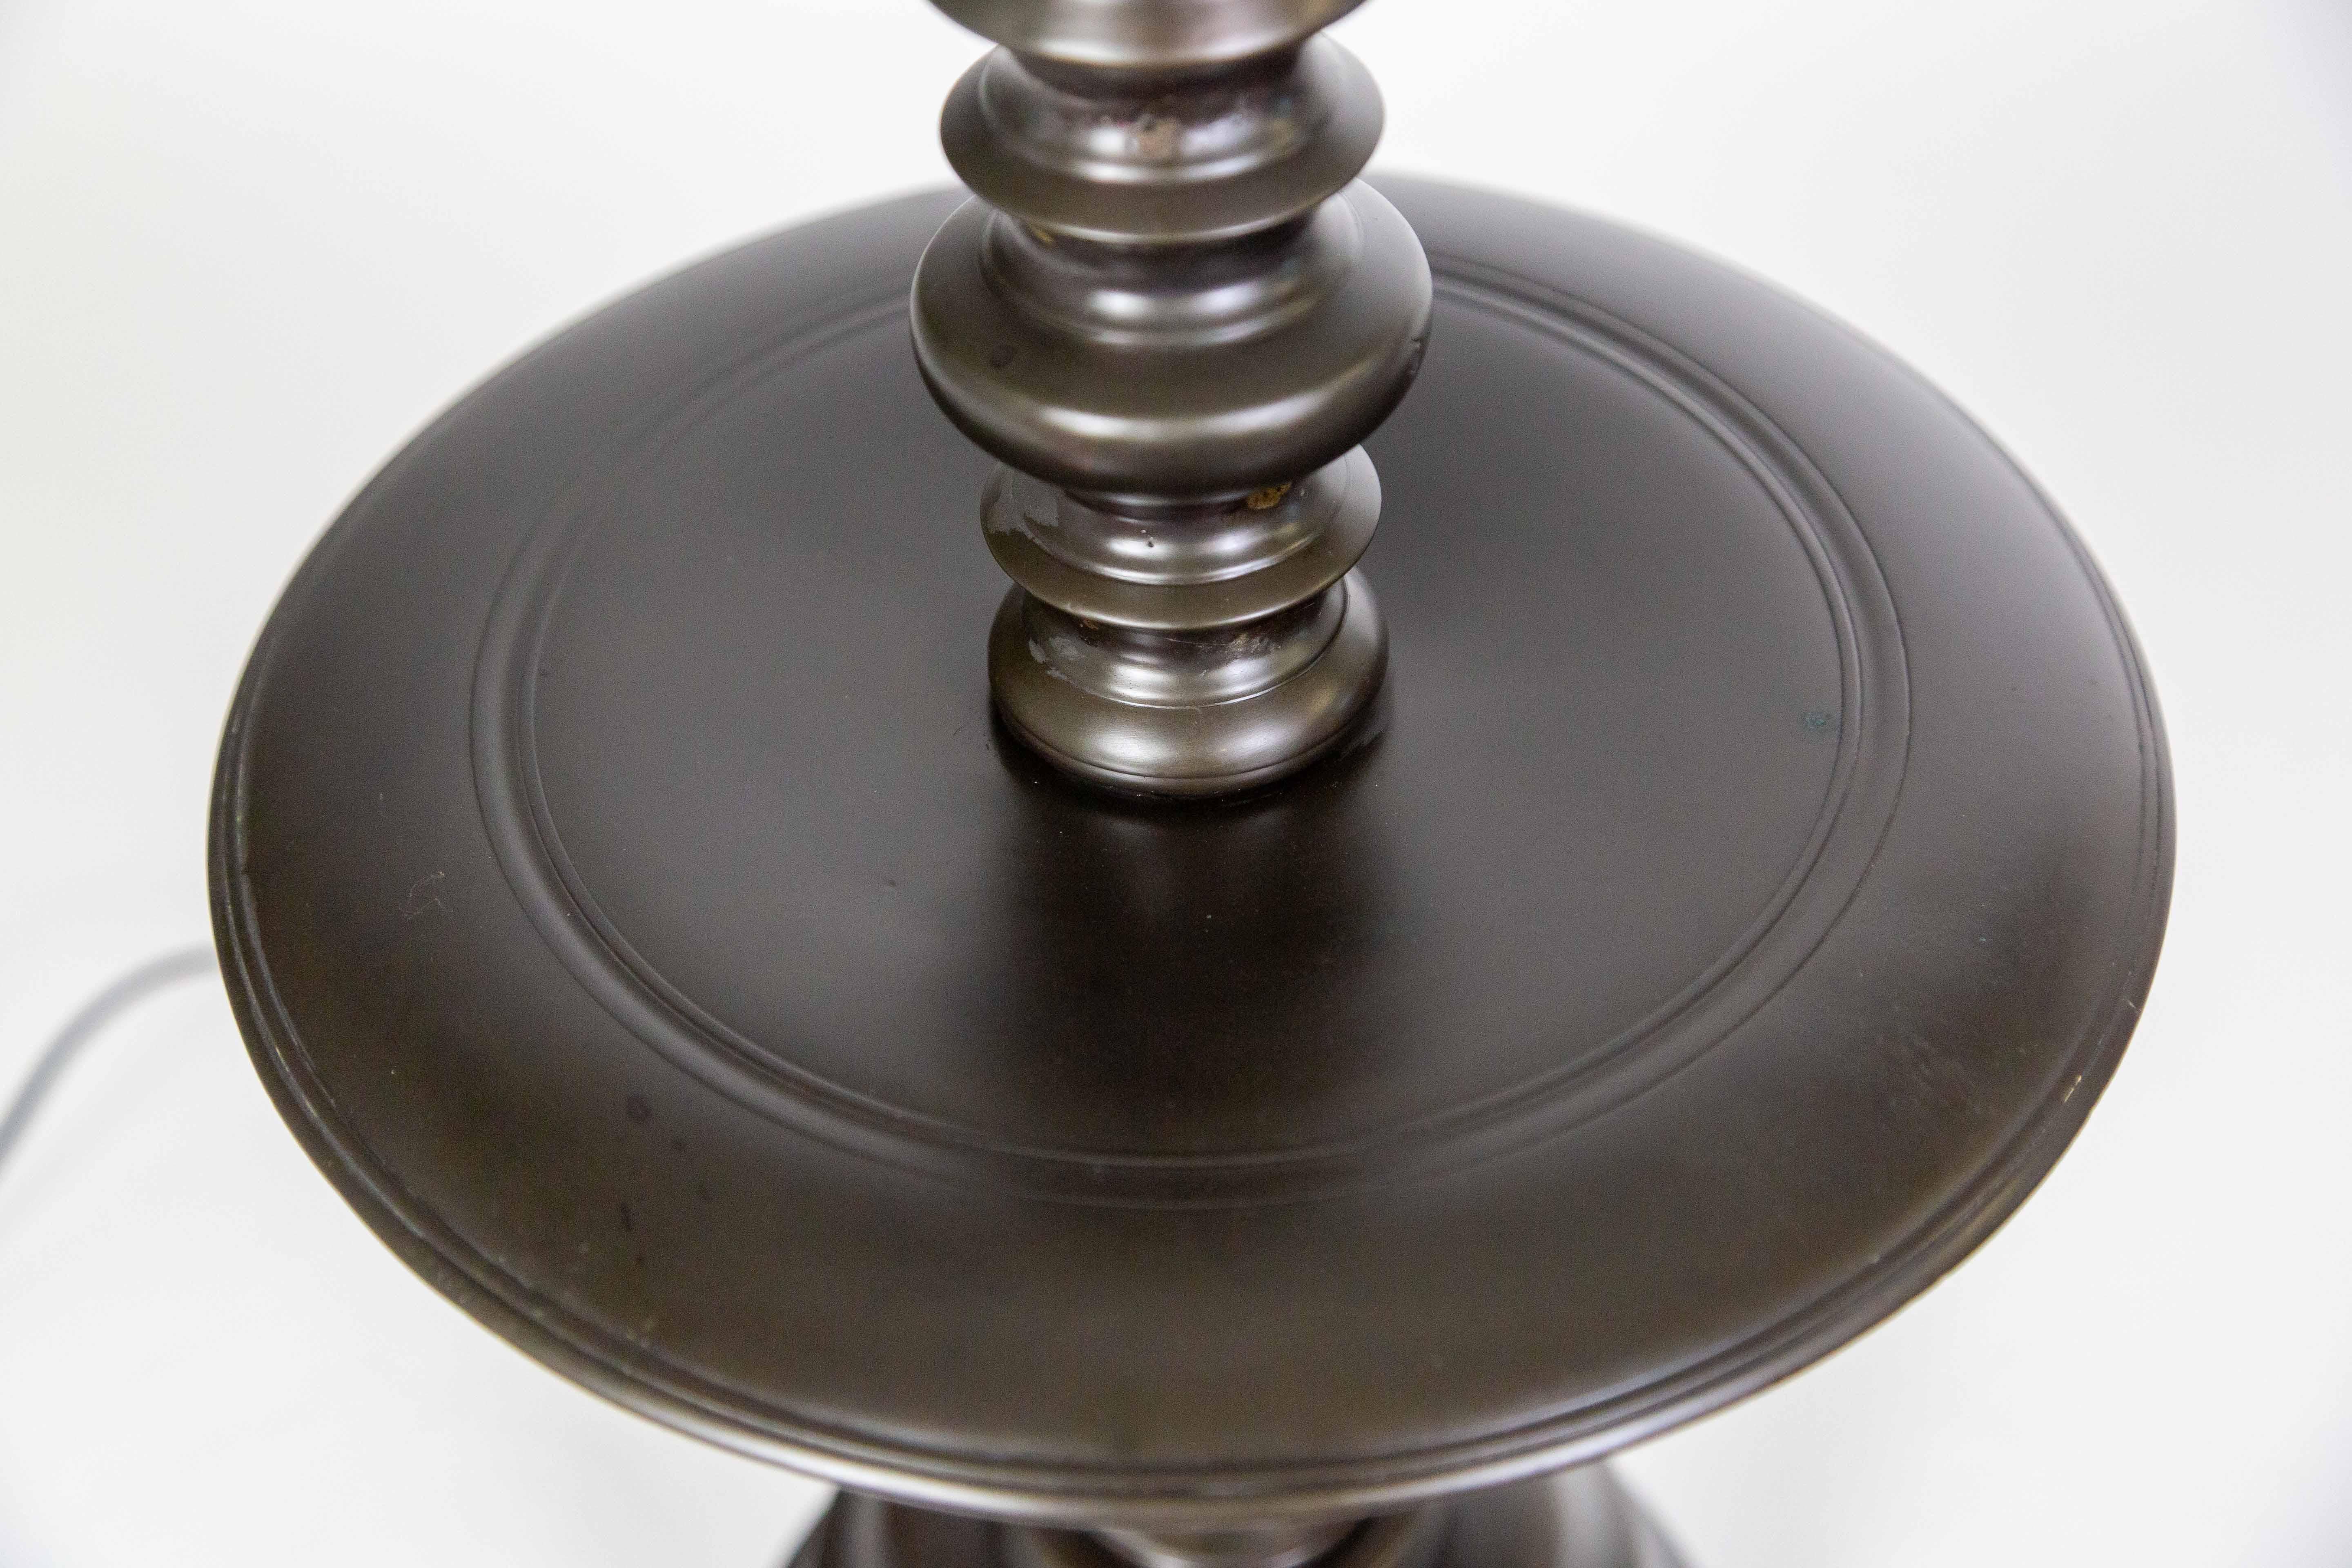 A Dutch Colonial lamp with a dish in the center of the turned-style, cast bronze body. It has a rich, dark, oil-rubbed bronze patina, a large base, and balanced proportions. The center try can remain bare, but is large enough to be used to place